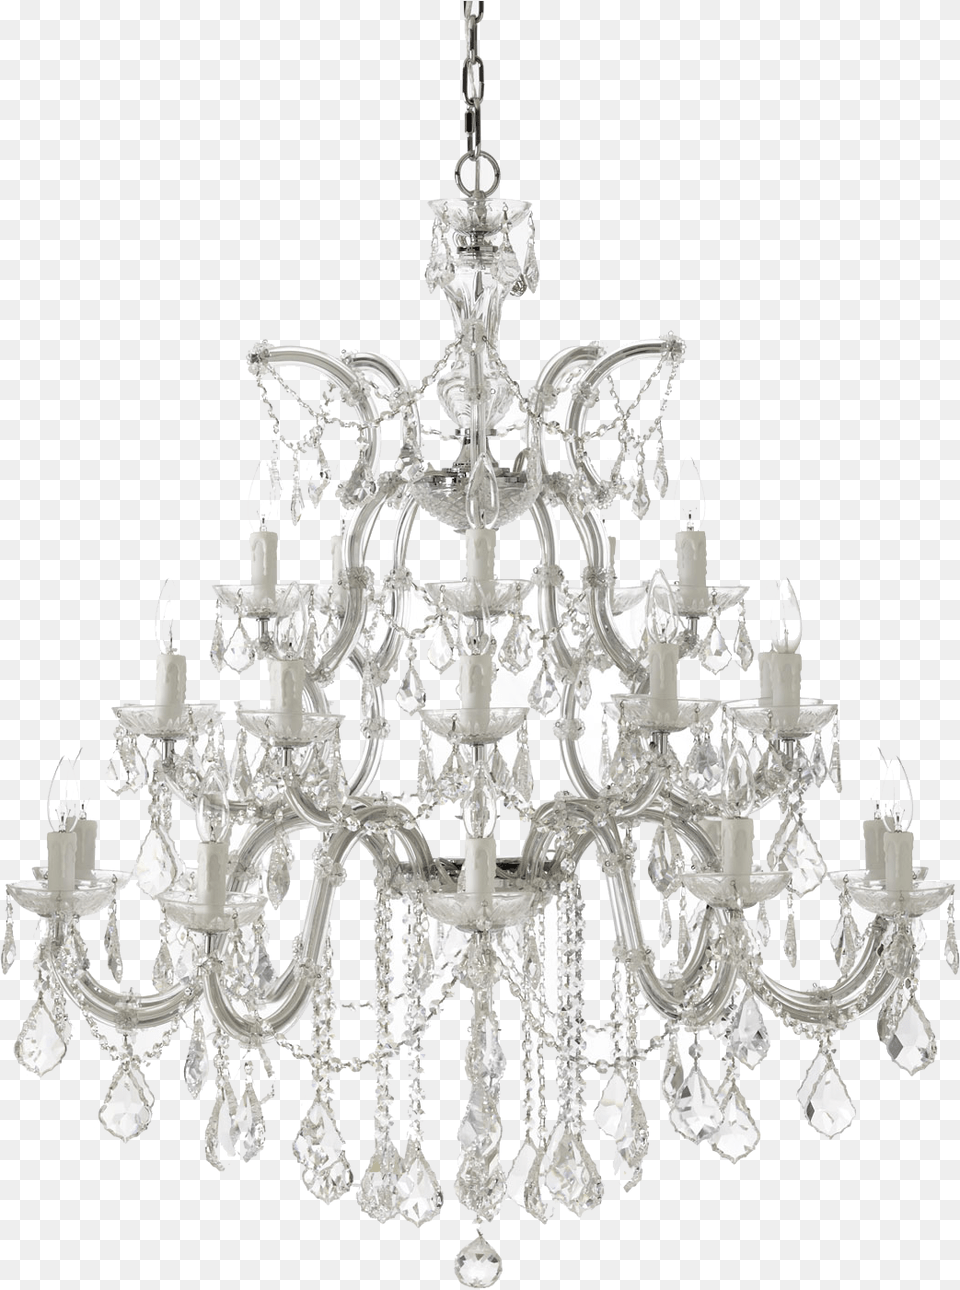 Chandeliers Candelabra Lifecrystal Lamp Chandelier Shabby Chic Cream Chandelier Png Image